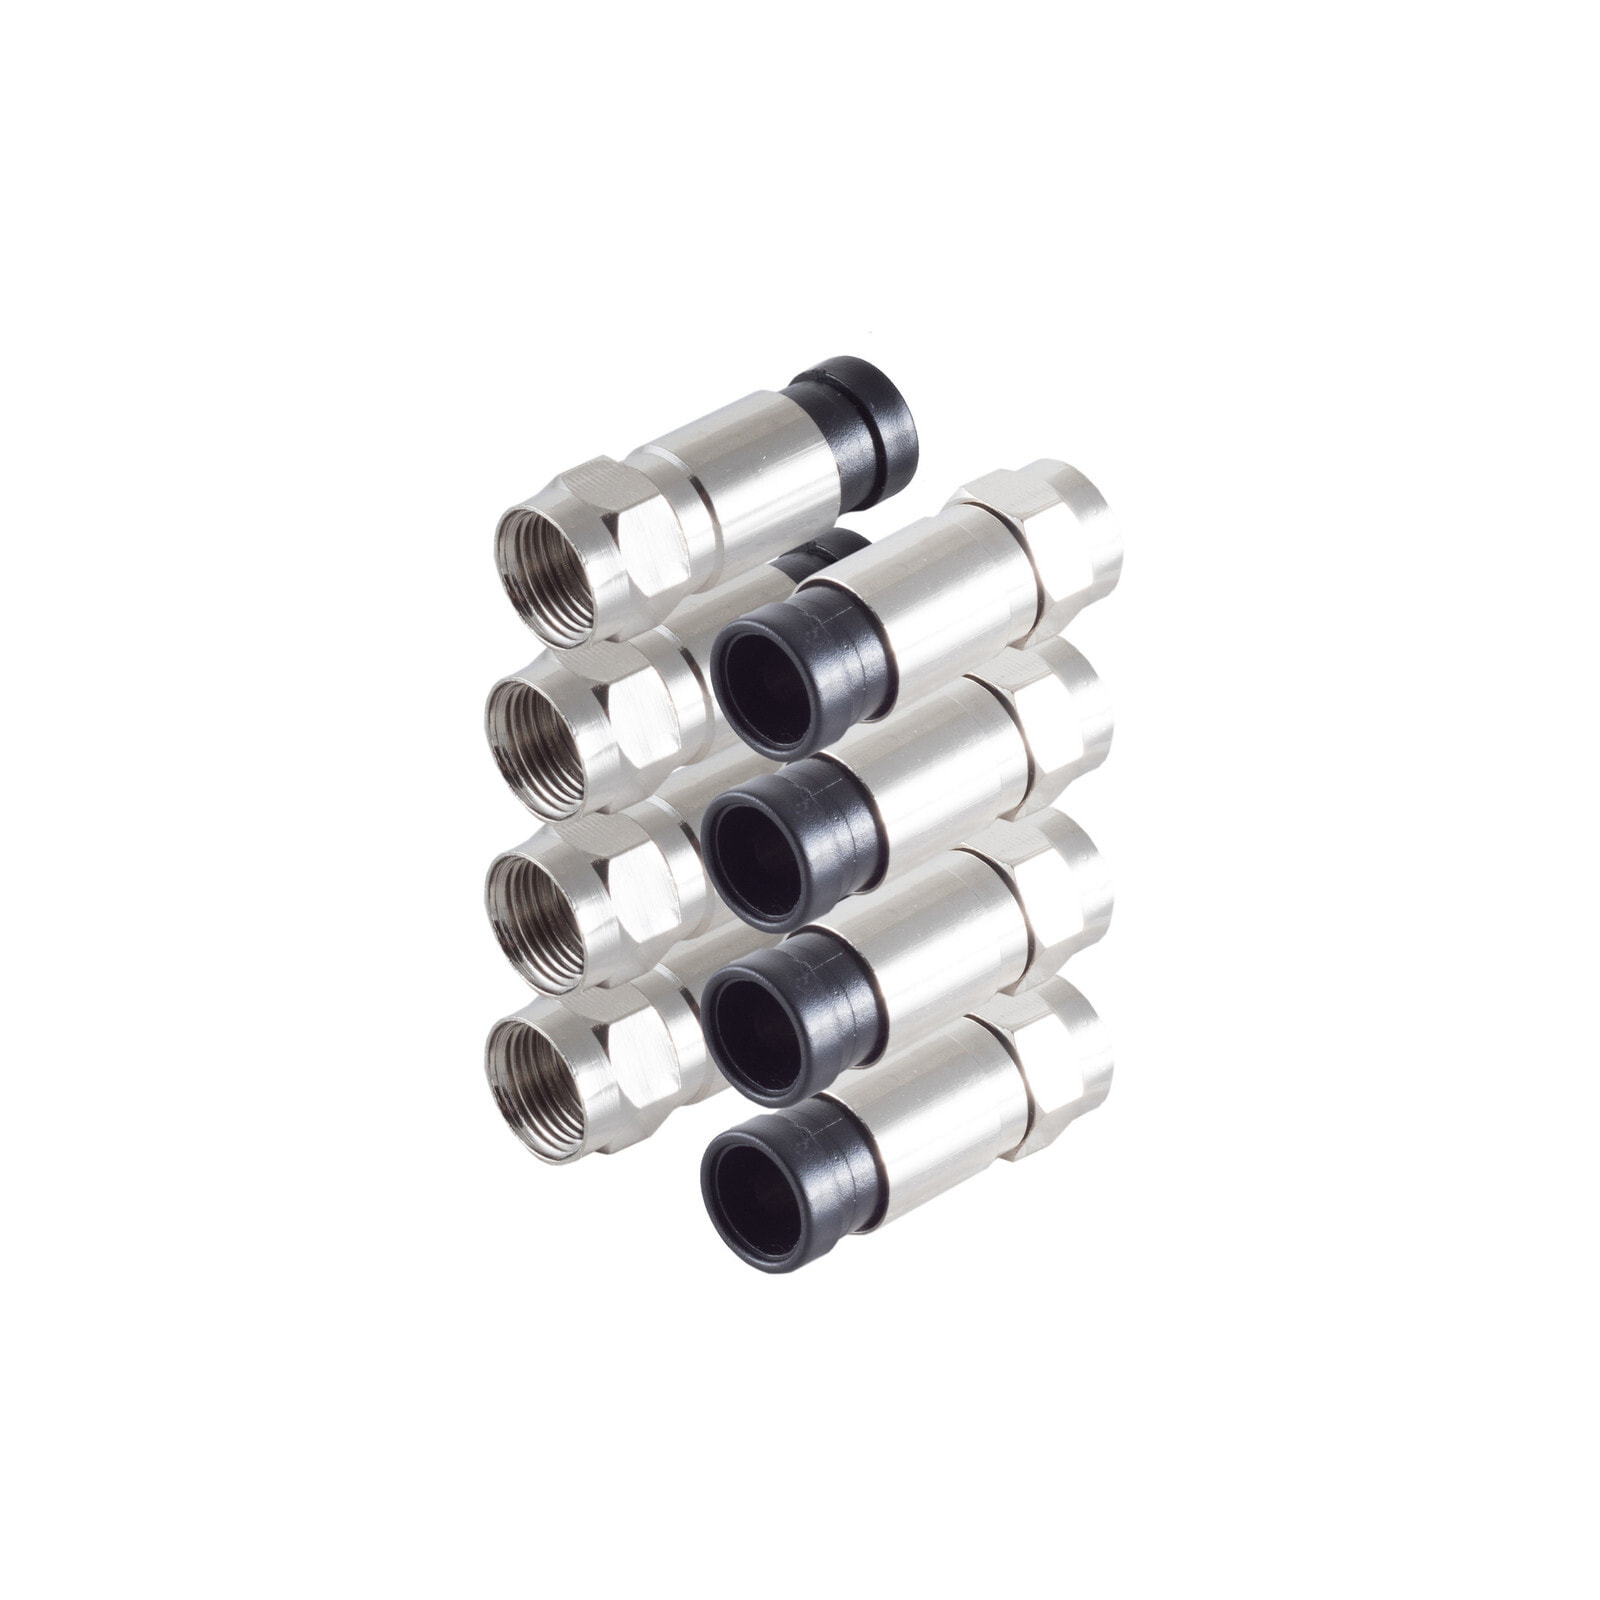 BS15-300214 - F-type - F - F - 7 mm - Stainless steel - 4 pc(s)